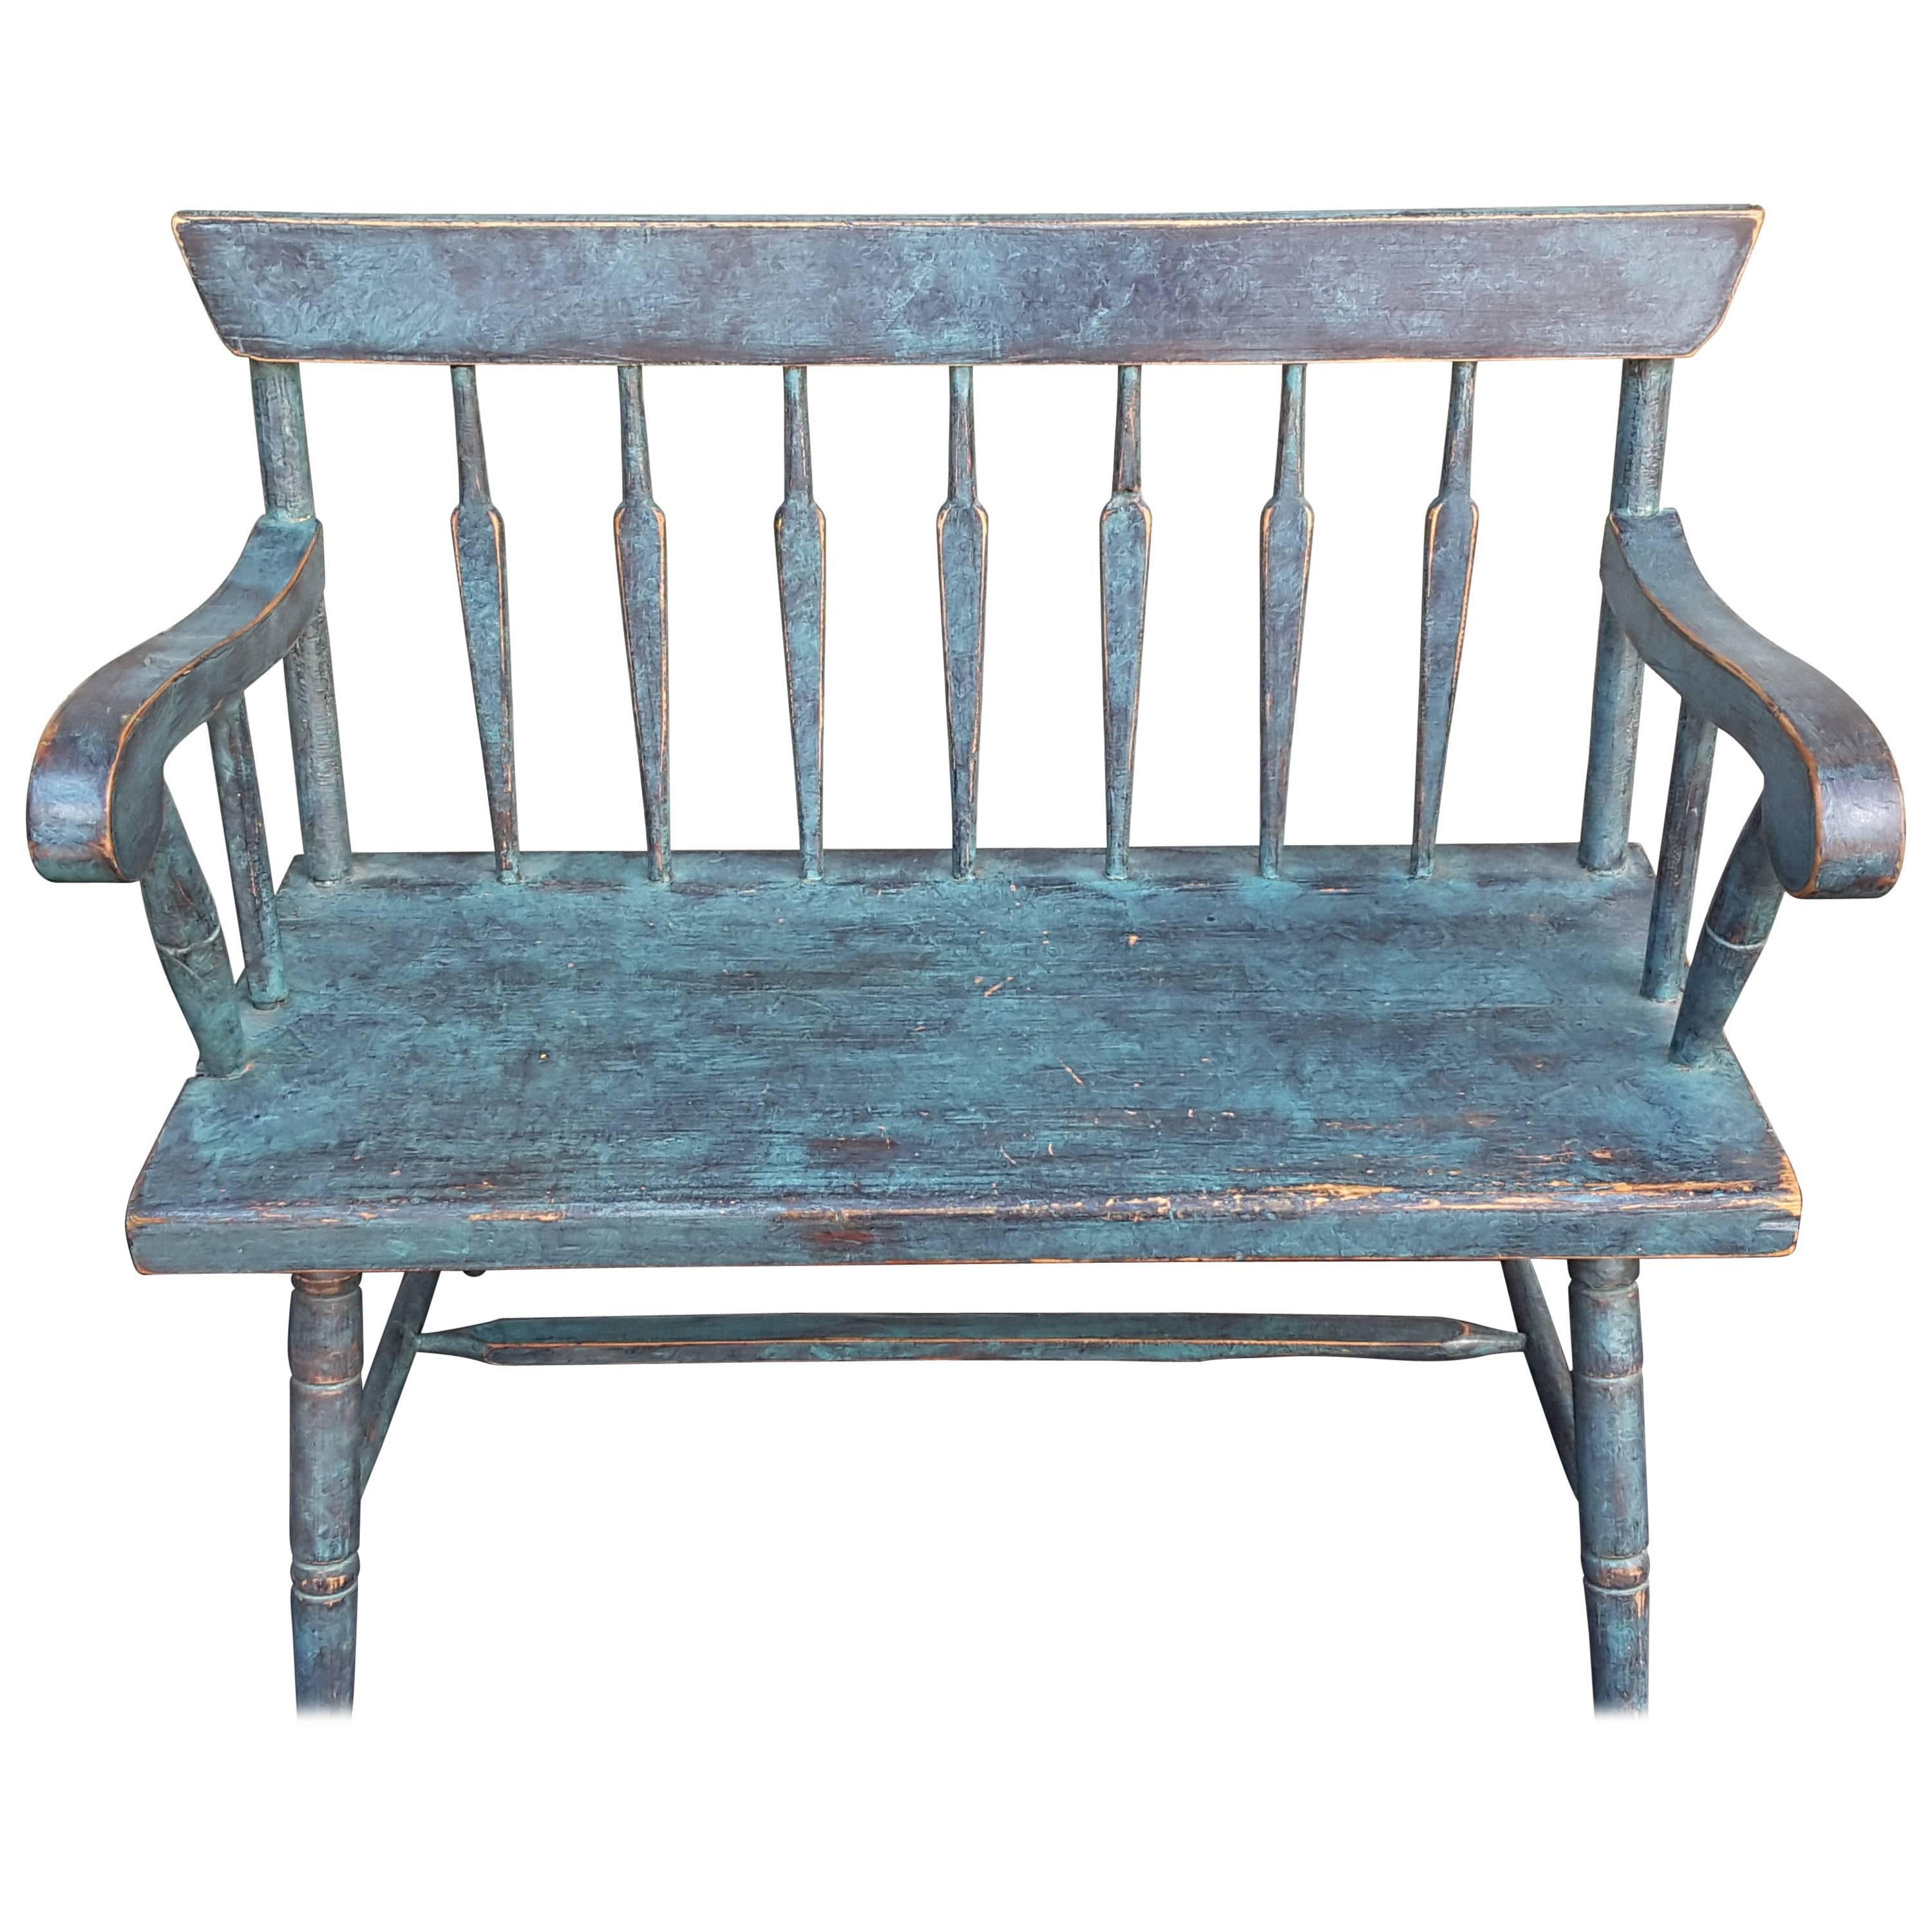 New England, Pine Spear Back Windsor Bench in Turquoise Blue, (Circa 1880)